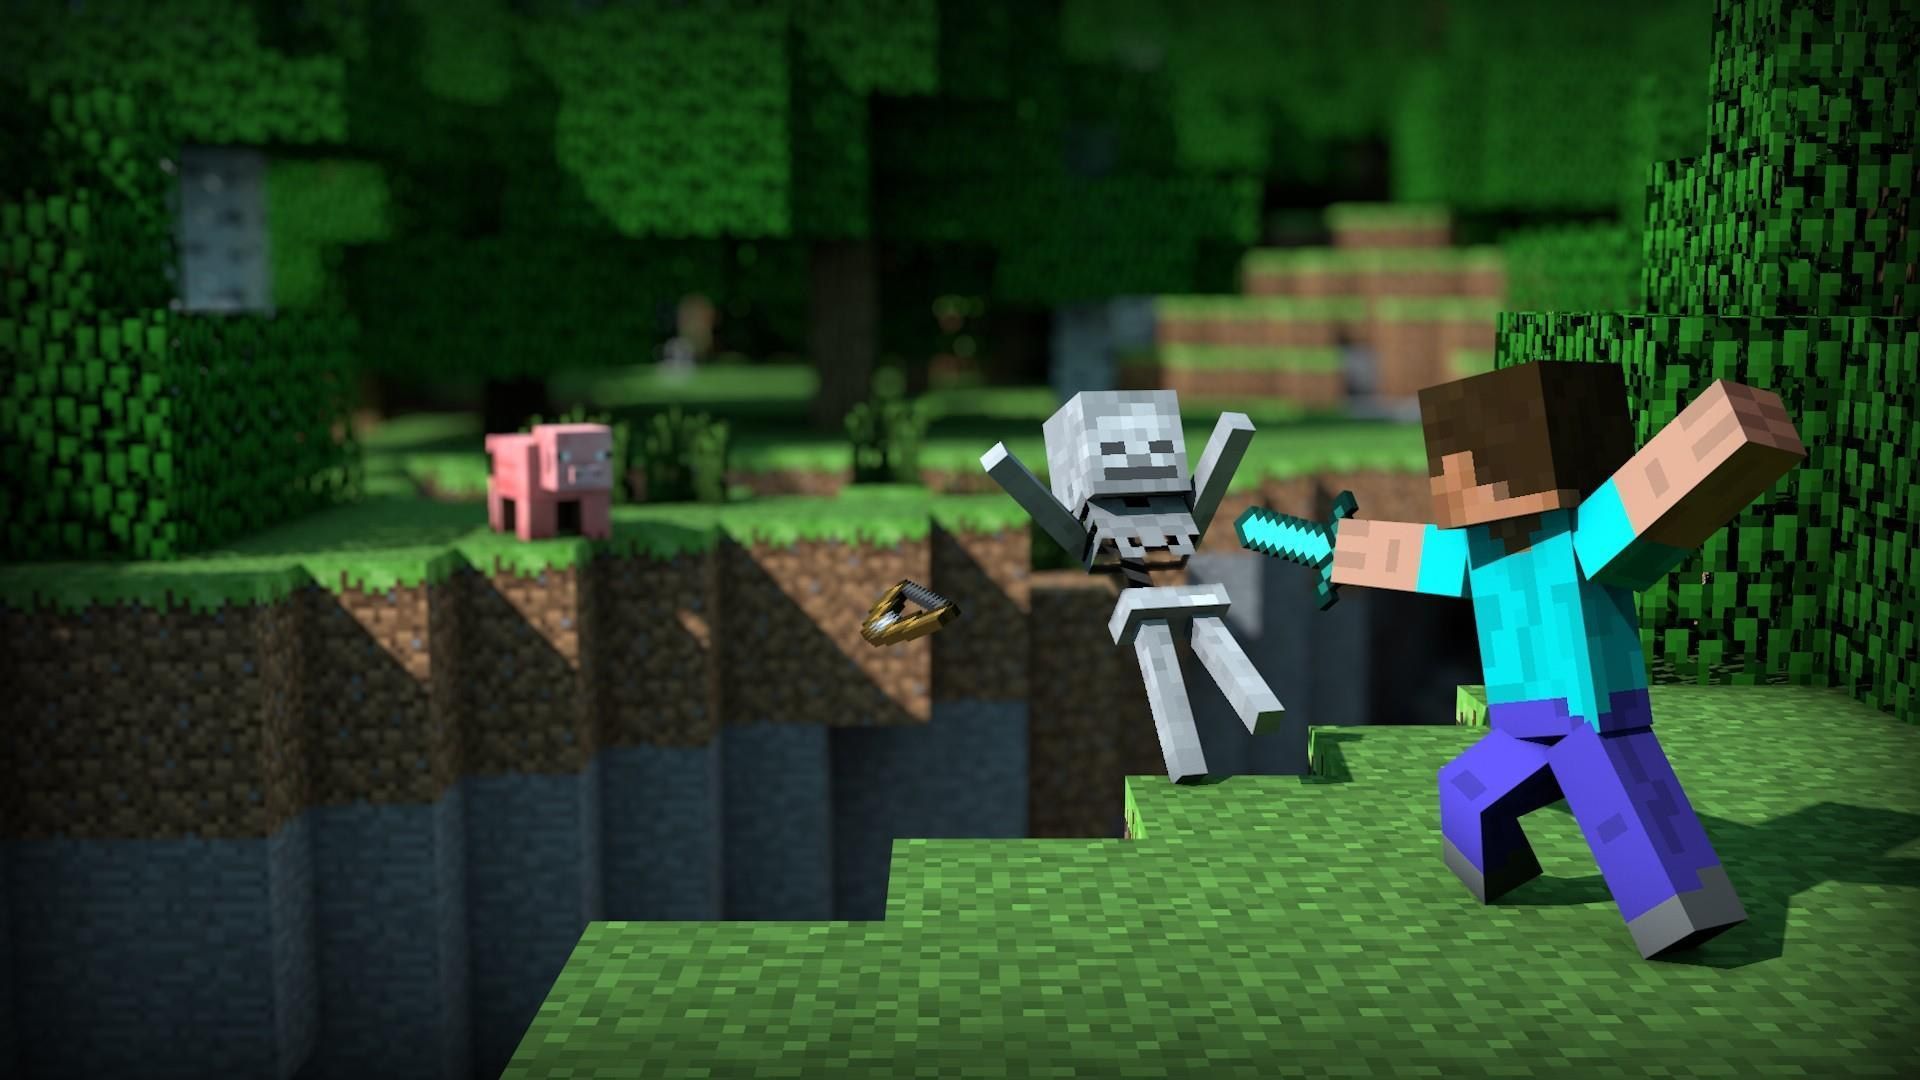 Minecraft wallpaper 1920x1080 - (#34499) - High Quality and ...